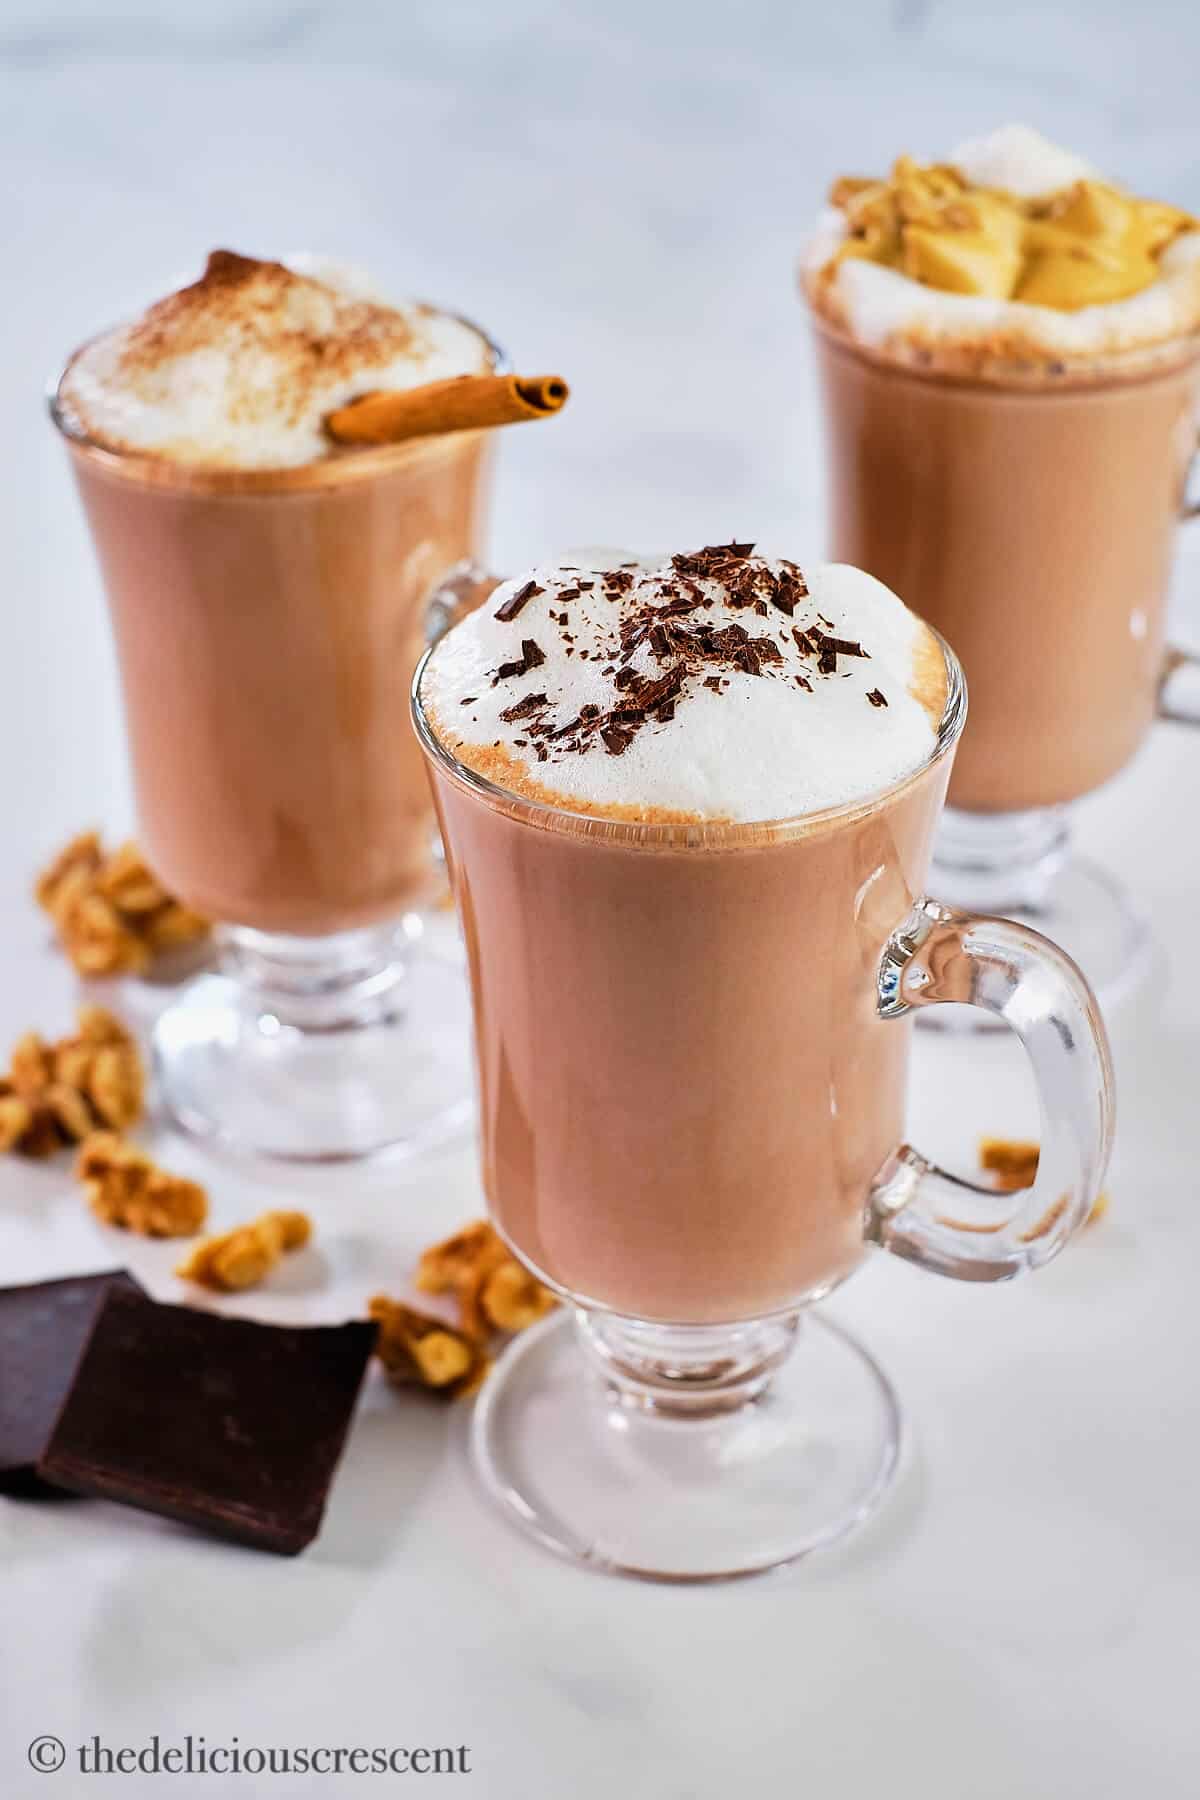 https://www.thedeliciouscrescent.com/wp-content/uploads/2016/05/Healthy-Hot-Chocolate-3.jpg